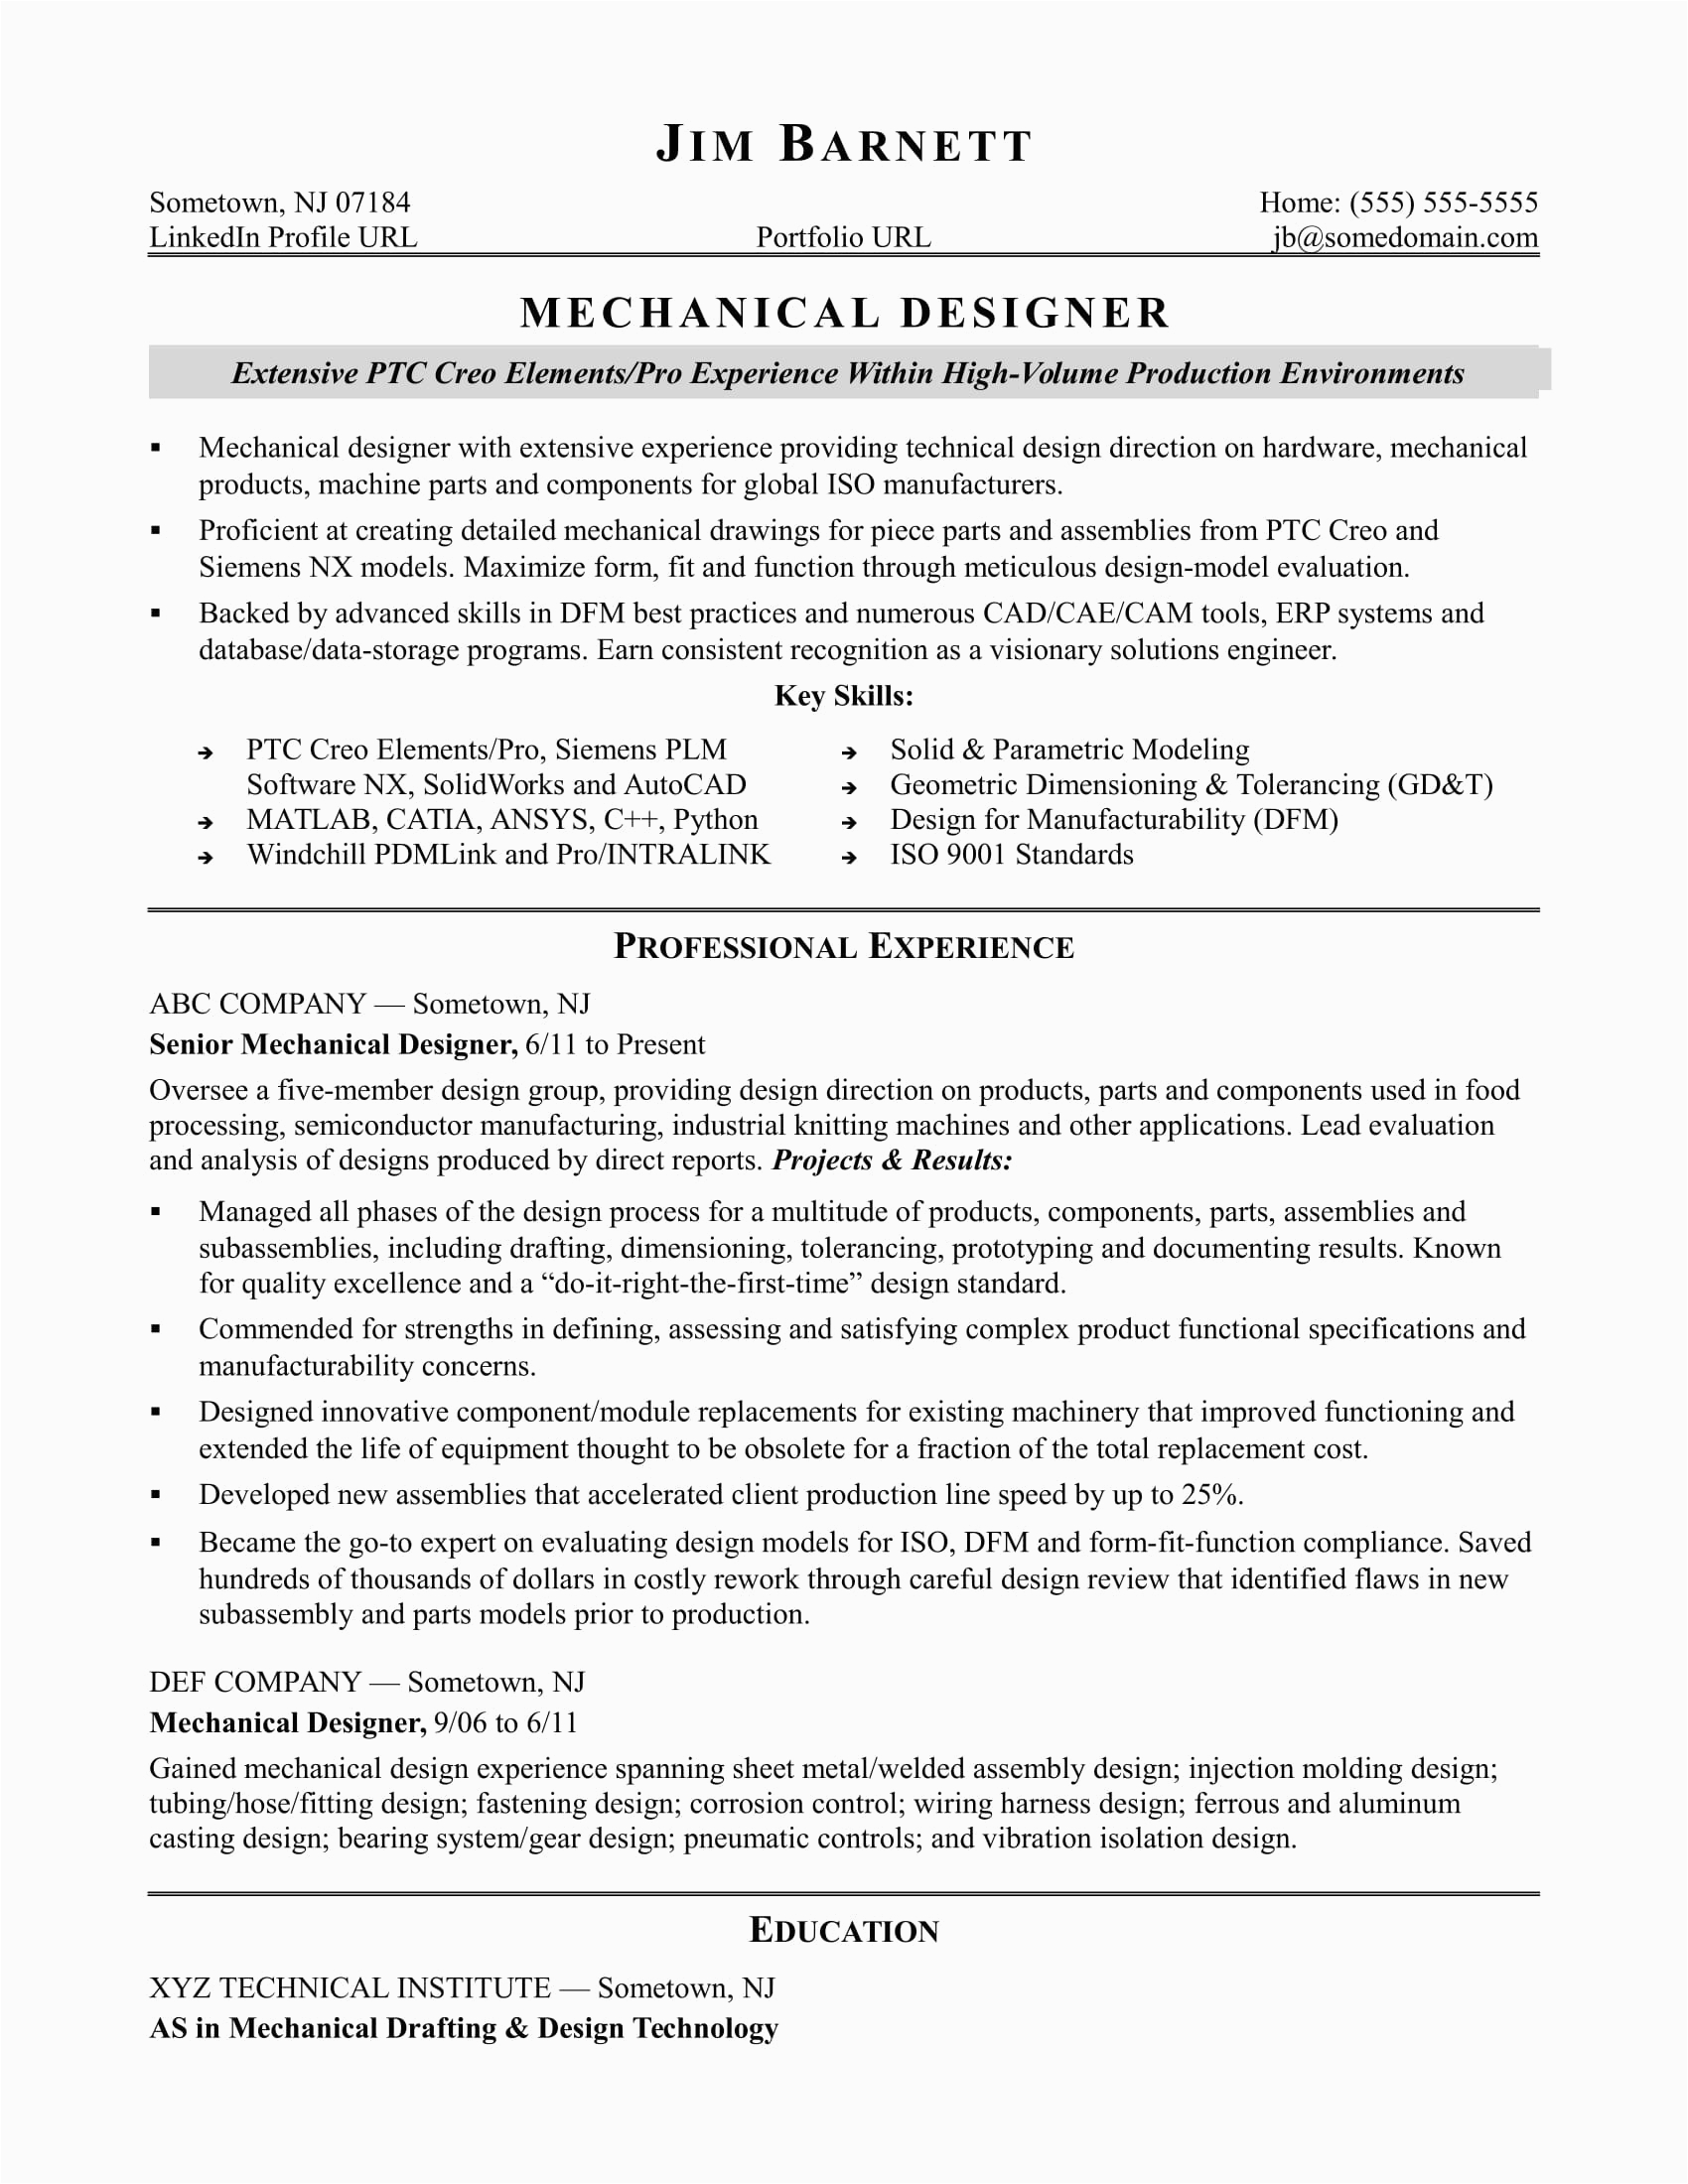 Sample Resume for Experienced Mechanical Engineer Sample Resume for An Experienced Mechanical Designer